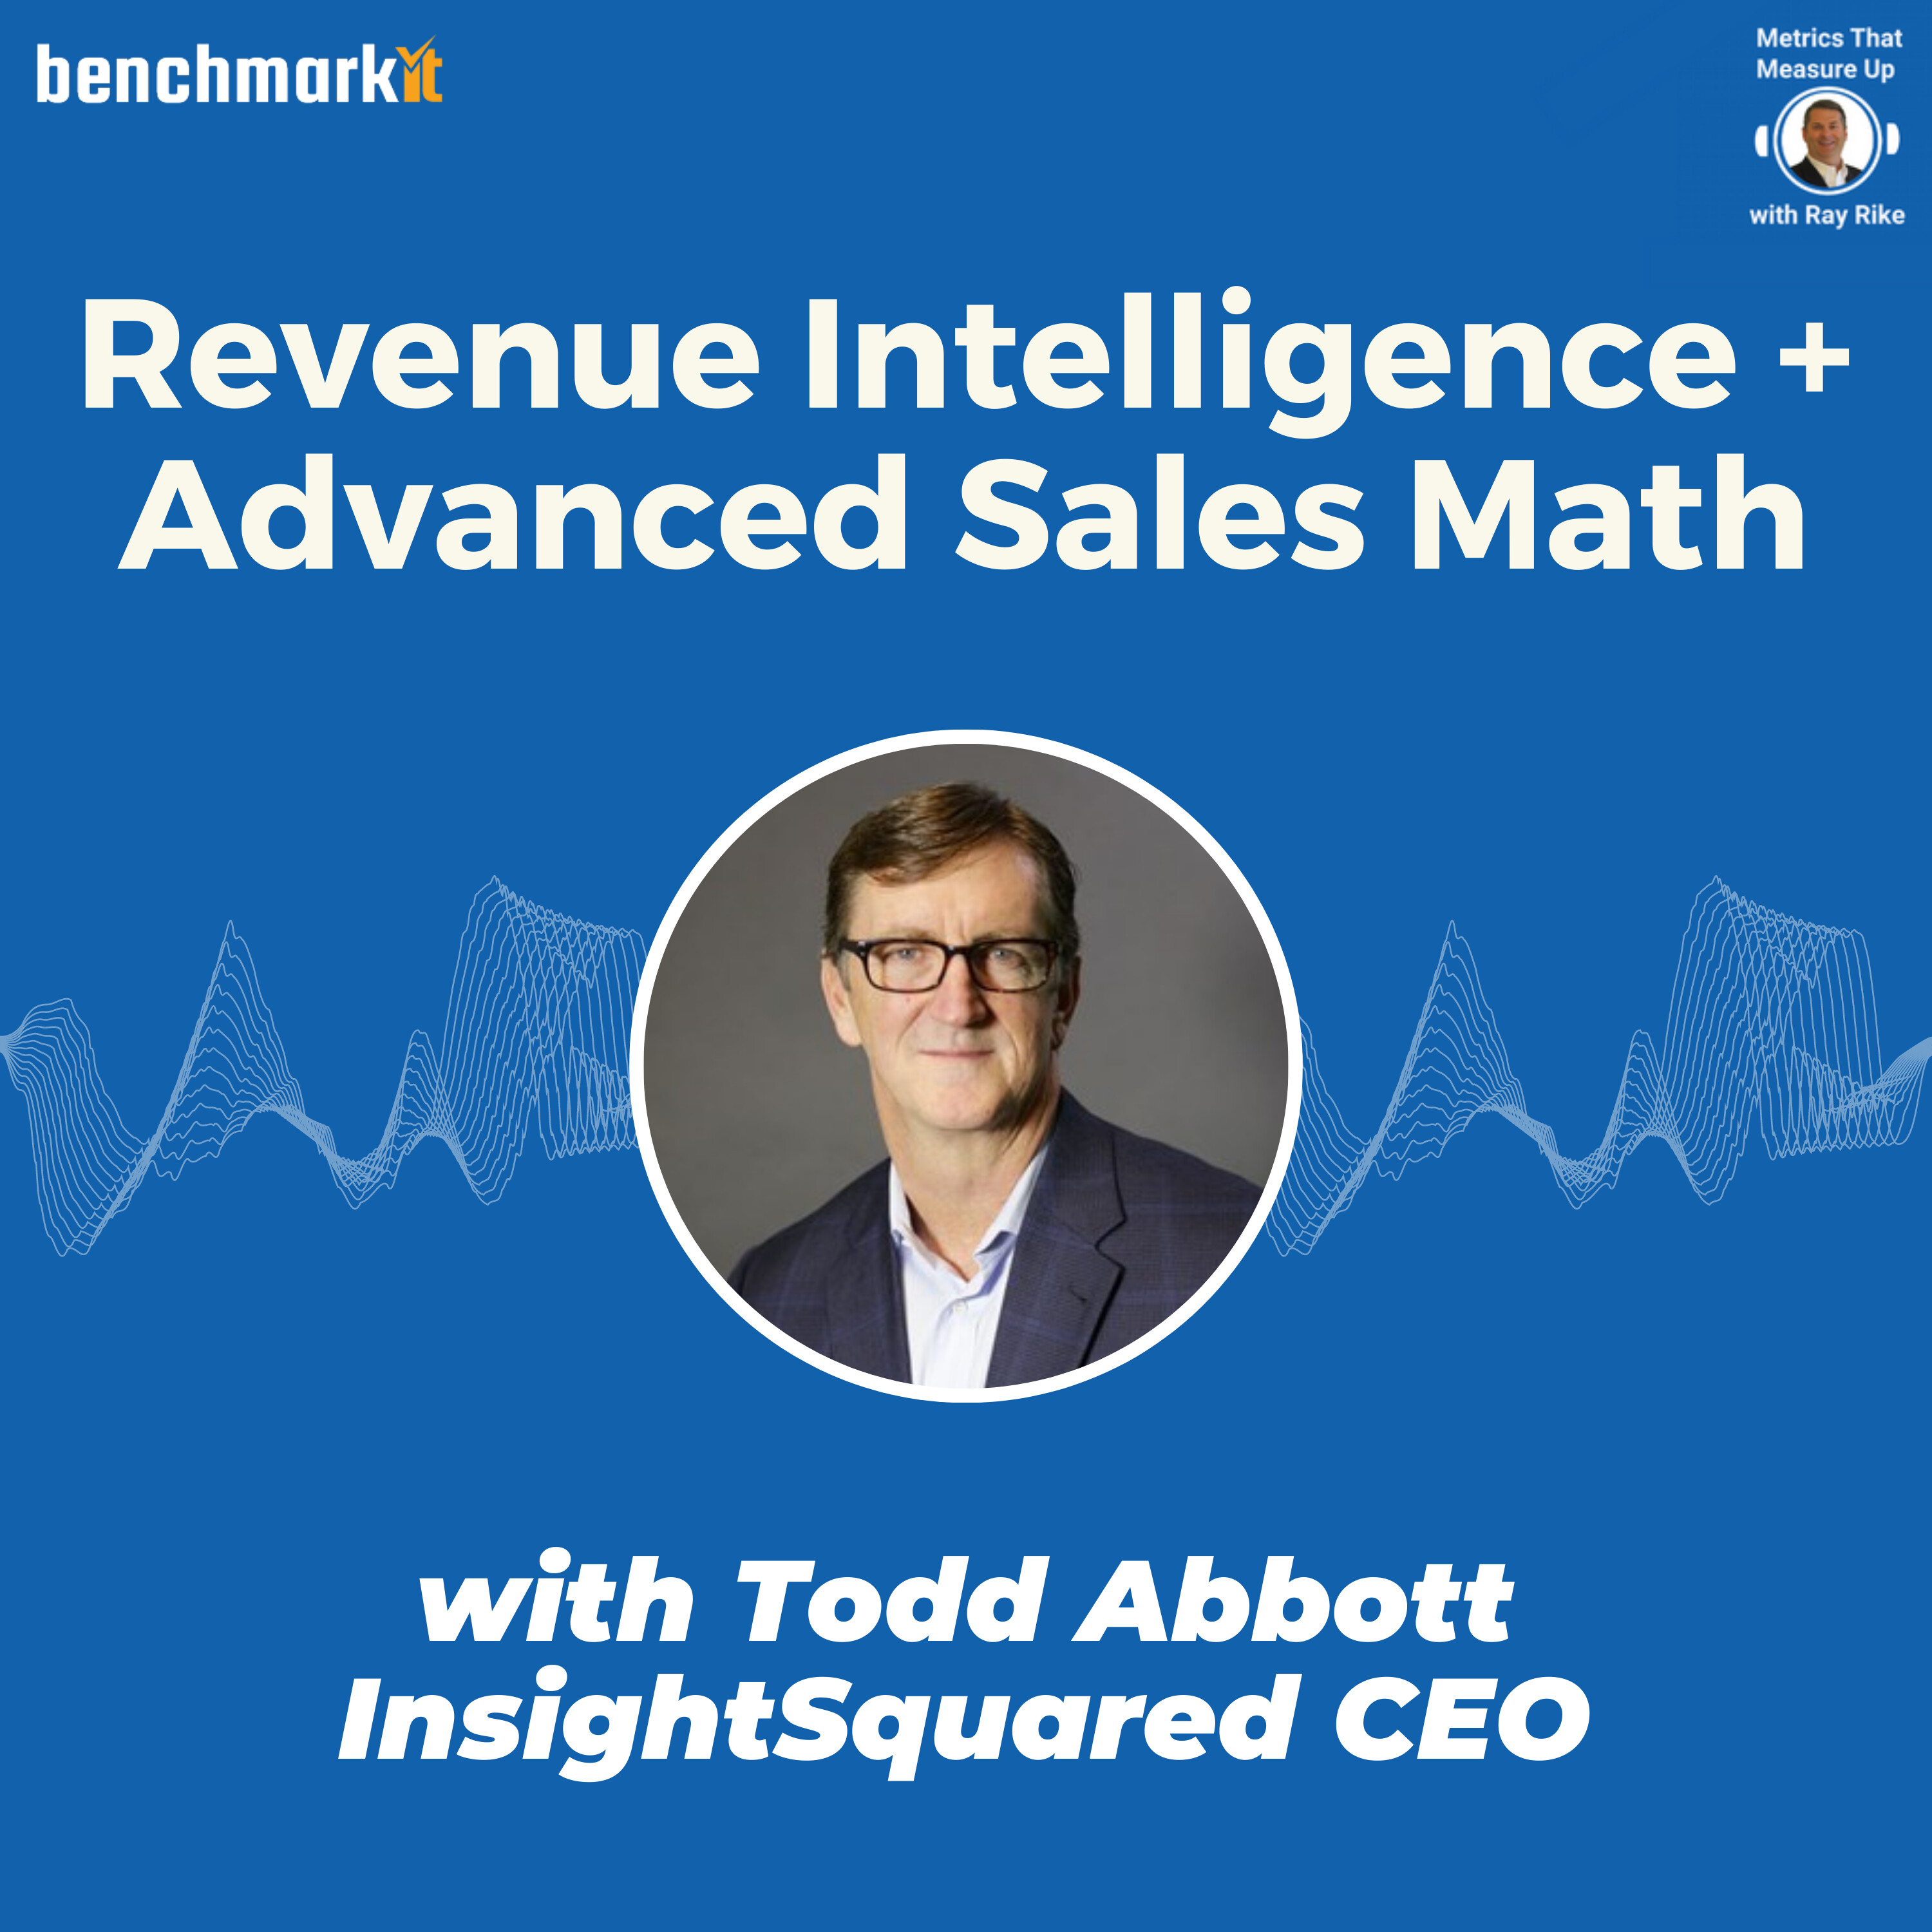 Revenue Intelligence + Advanced Sales Math - with Todd Abbott, InsightSquared CEO